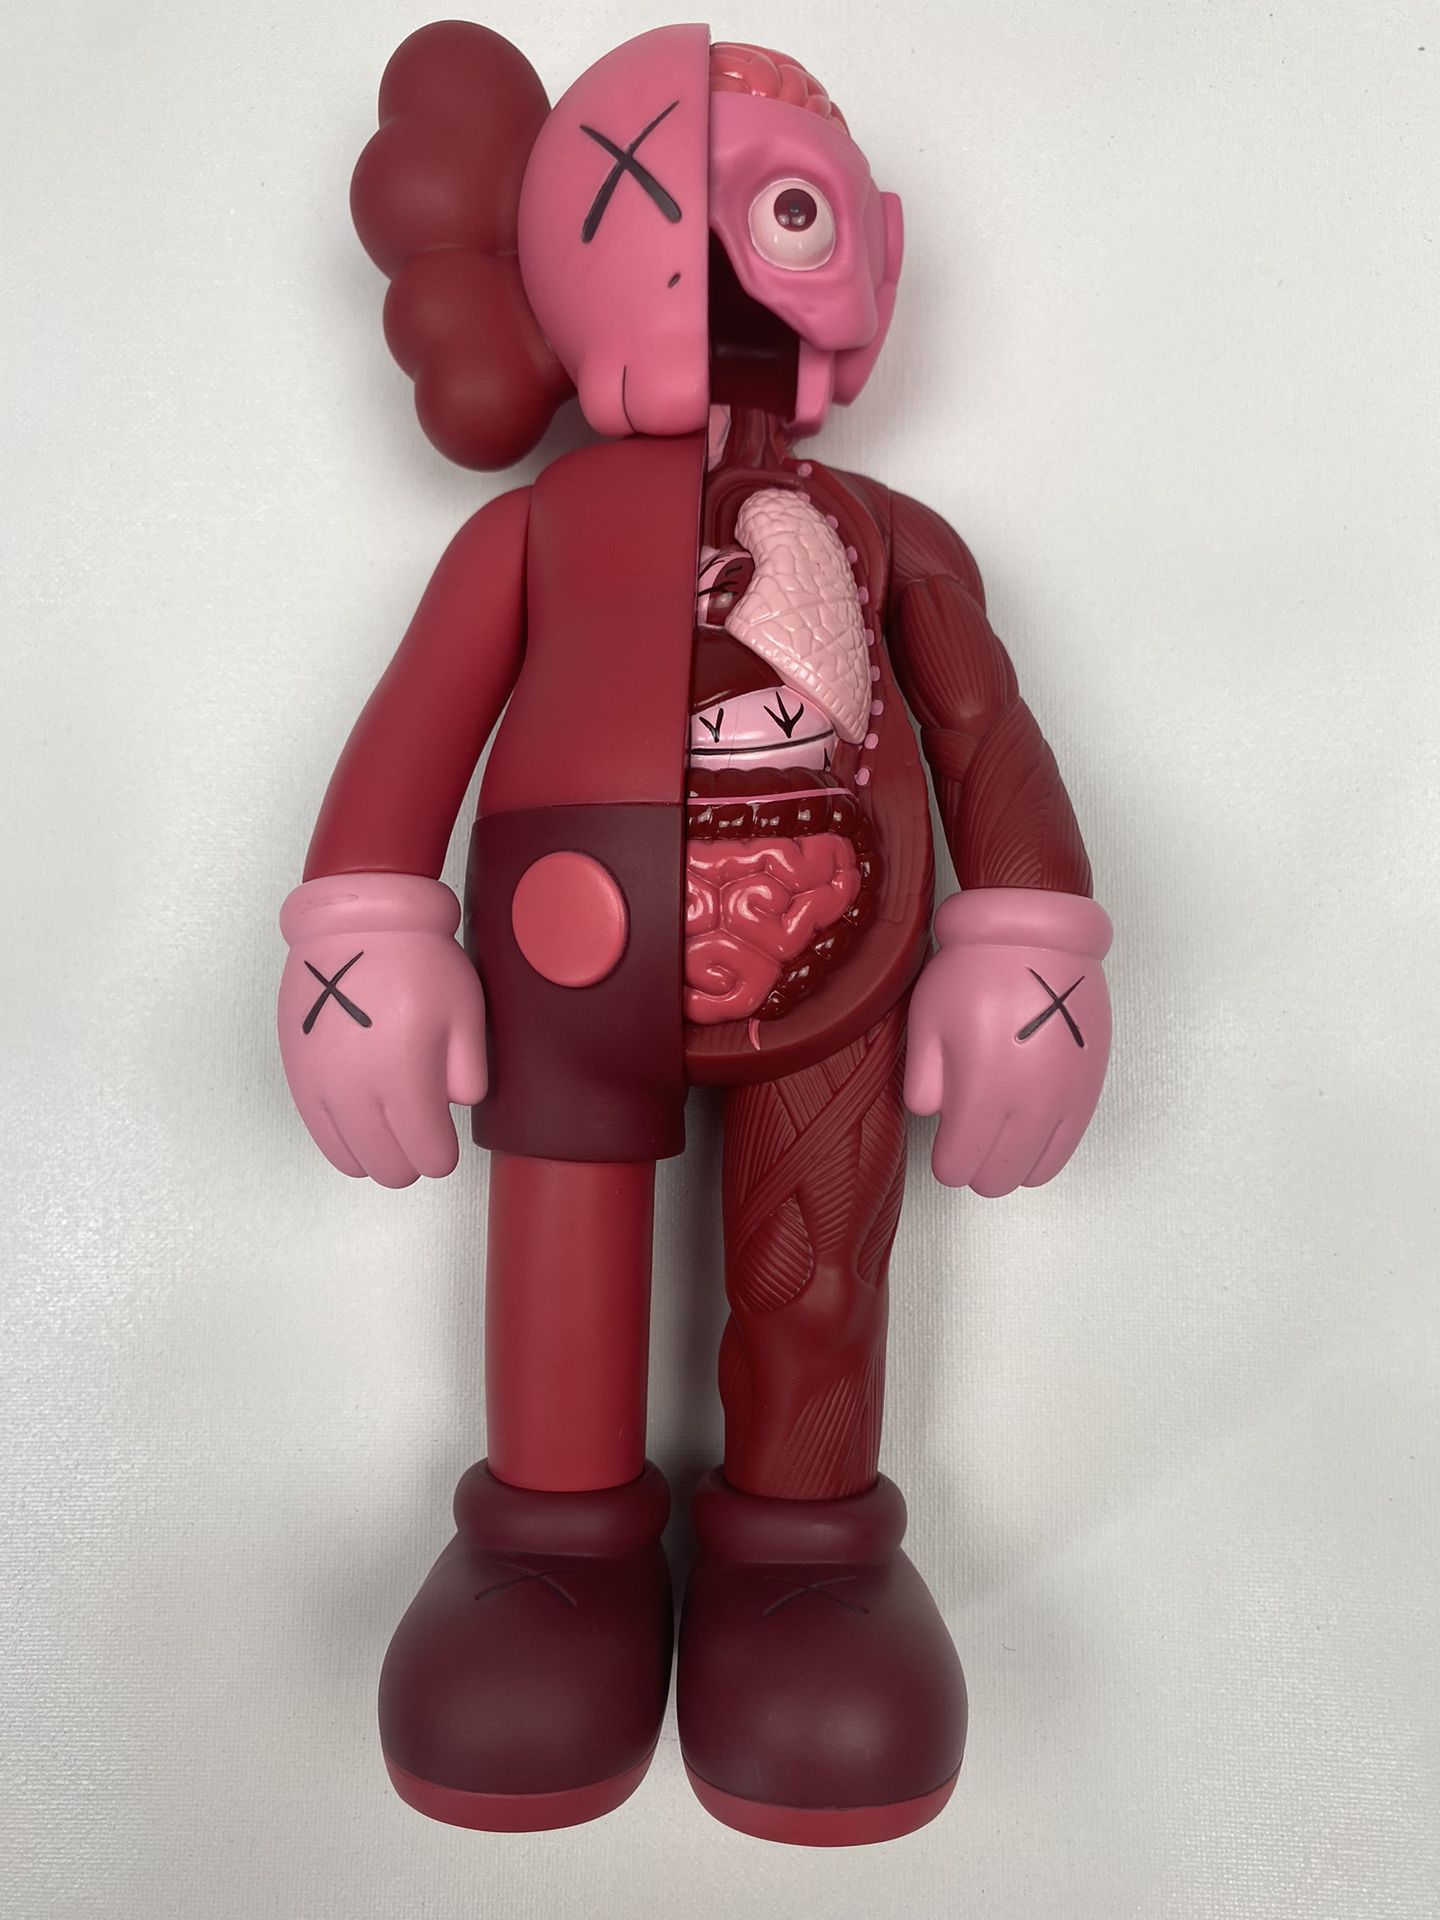 '16 Kaws Companion Open Edition Flayed Figure for Sale in